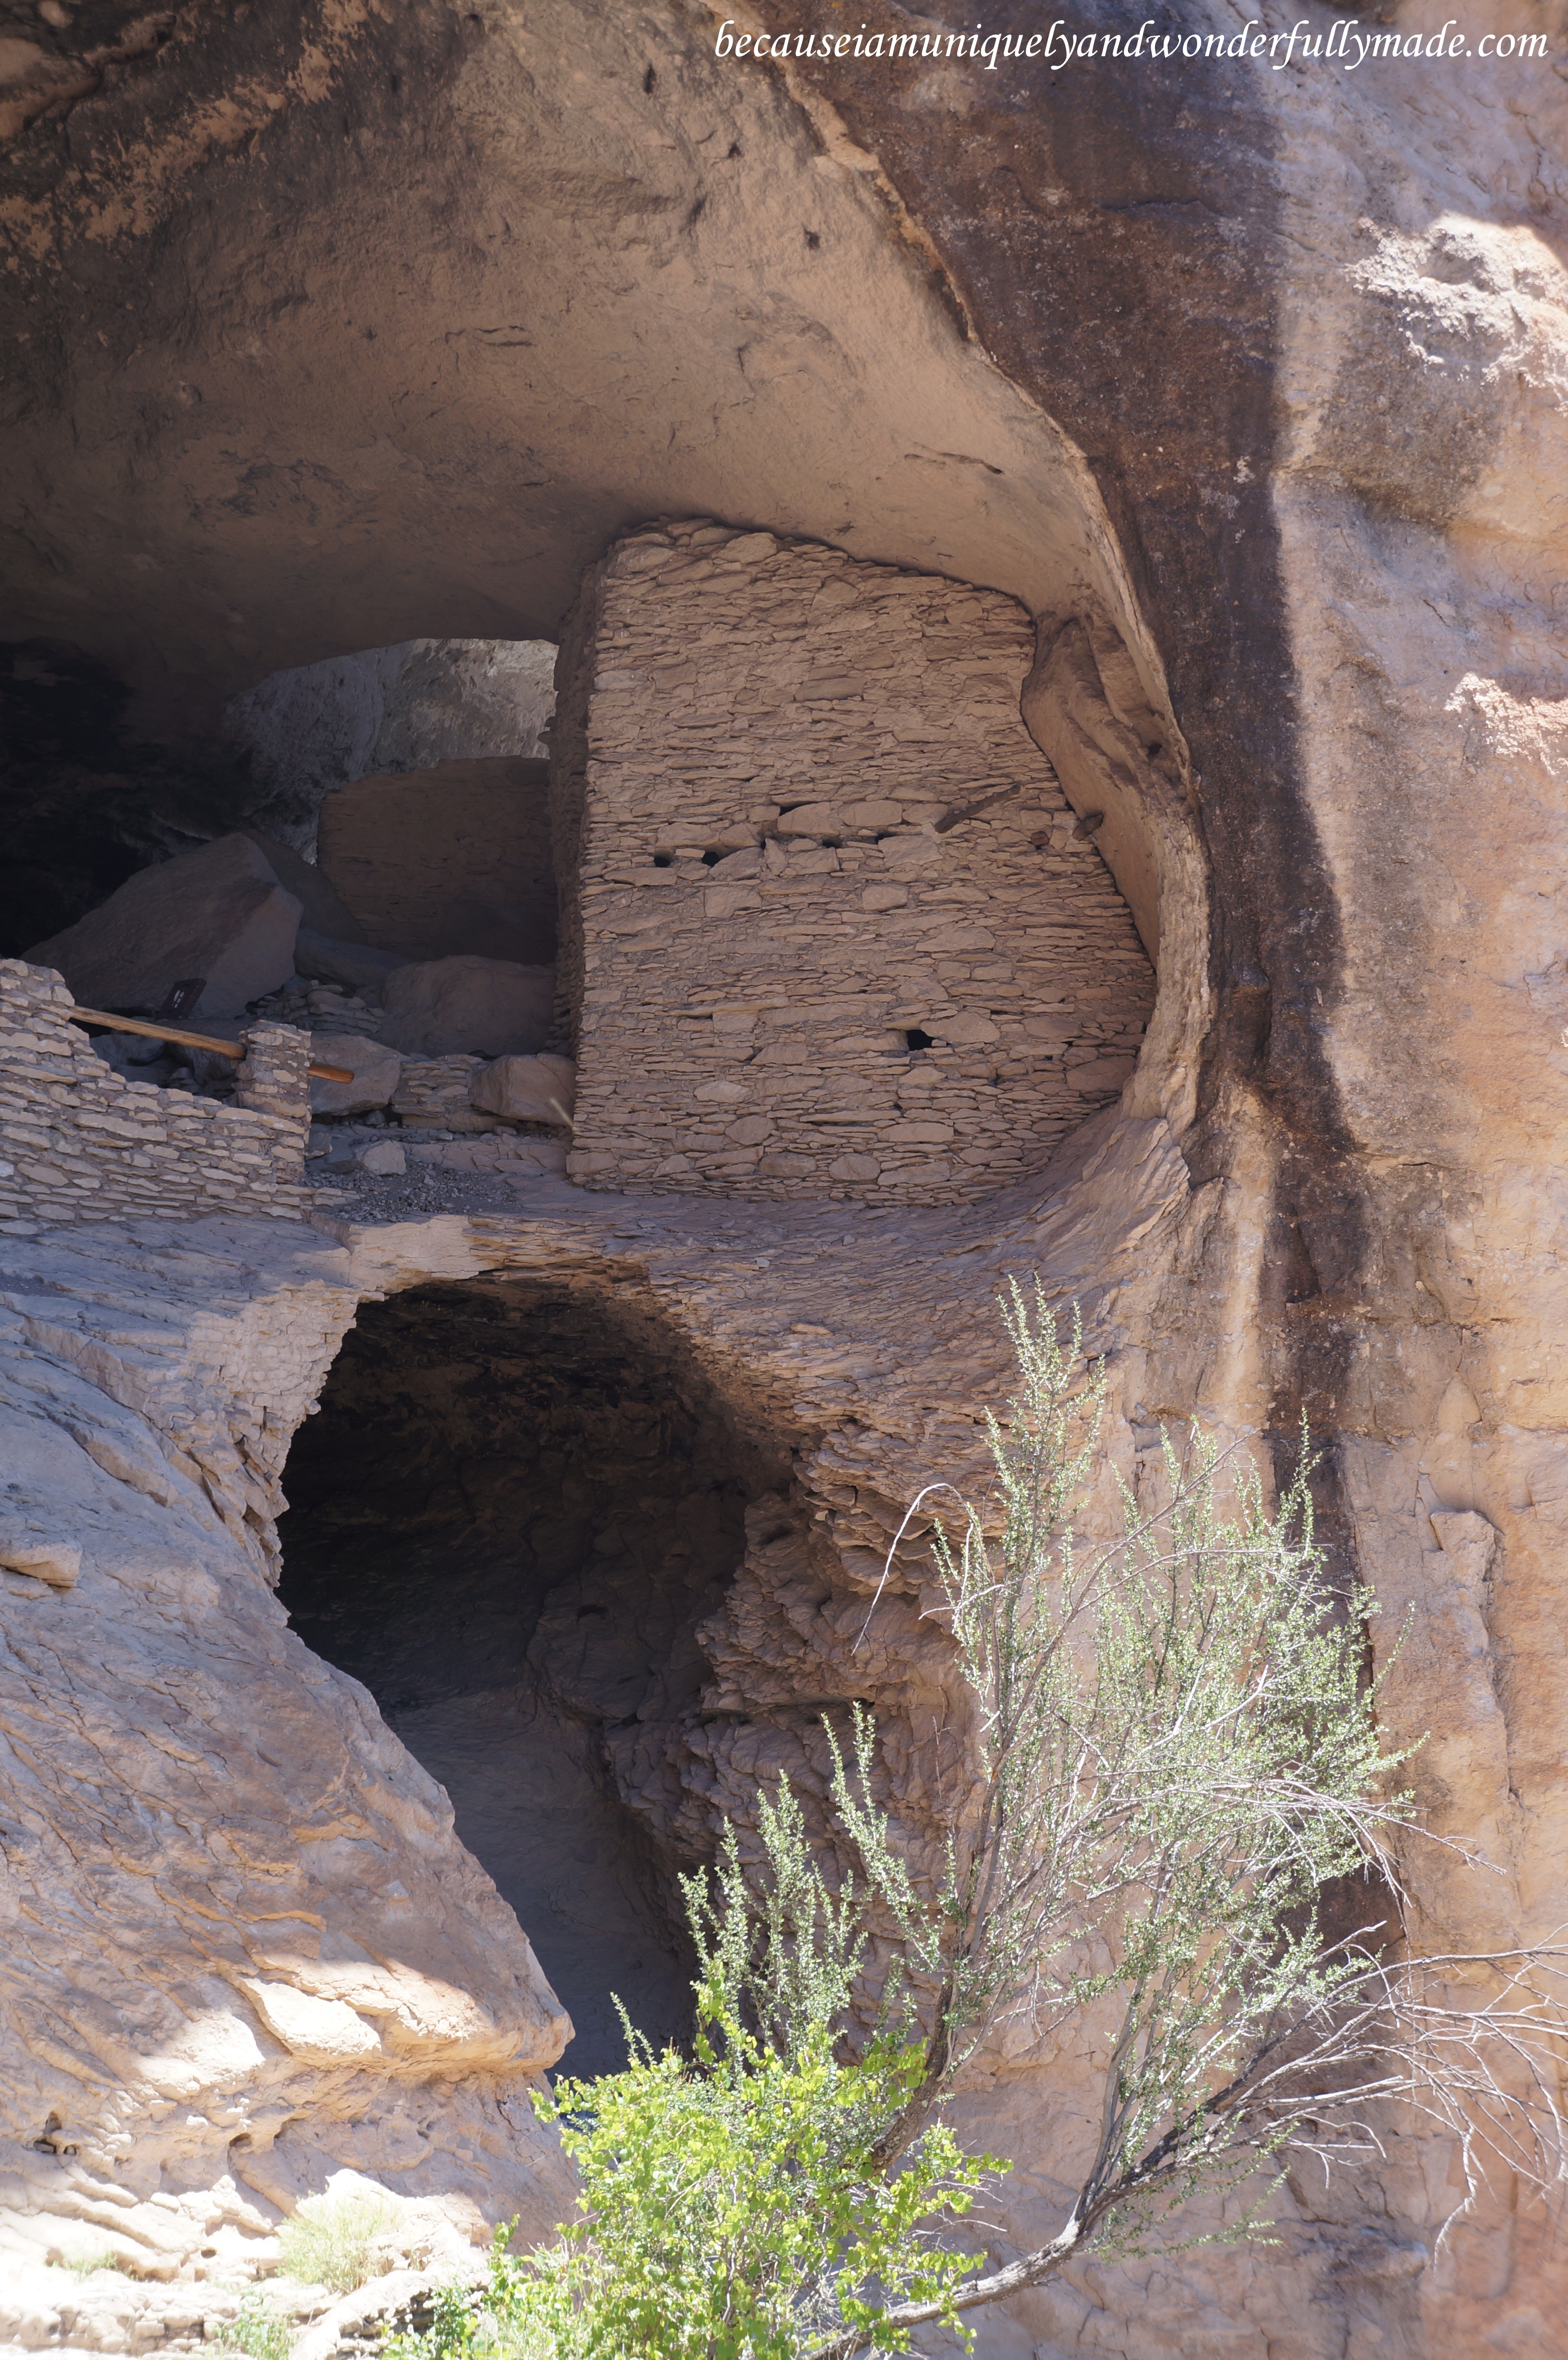 In addition to the natural protection provided by a cliff, the absence of doors and windows to the rooms on the ground floor of Gila Cliff Dwellings left a solid outer stone wall that could be surmounted only by climbing a ladder. Ladders could easily be removed if being attacked.